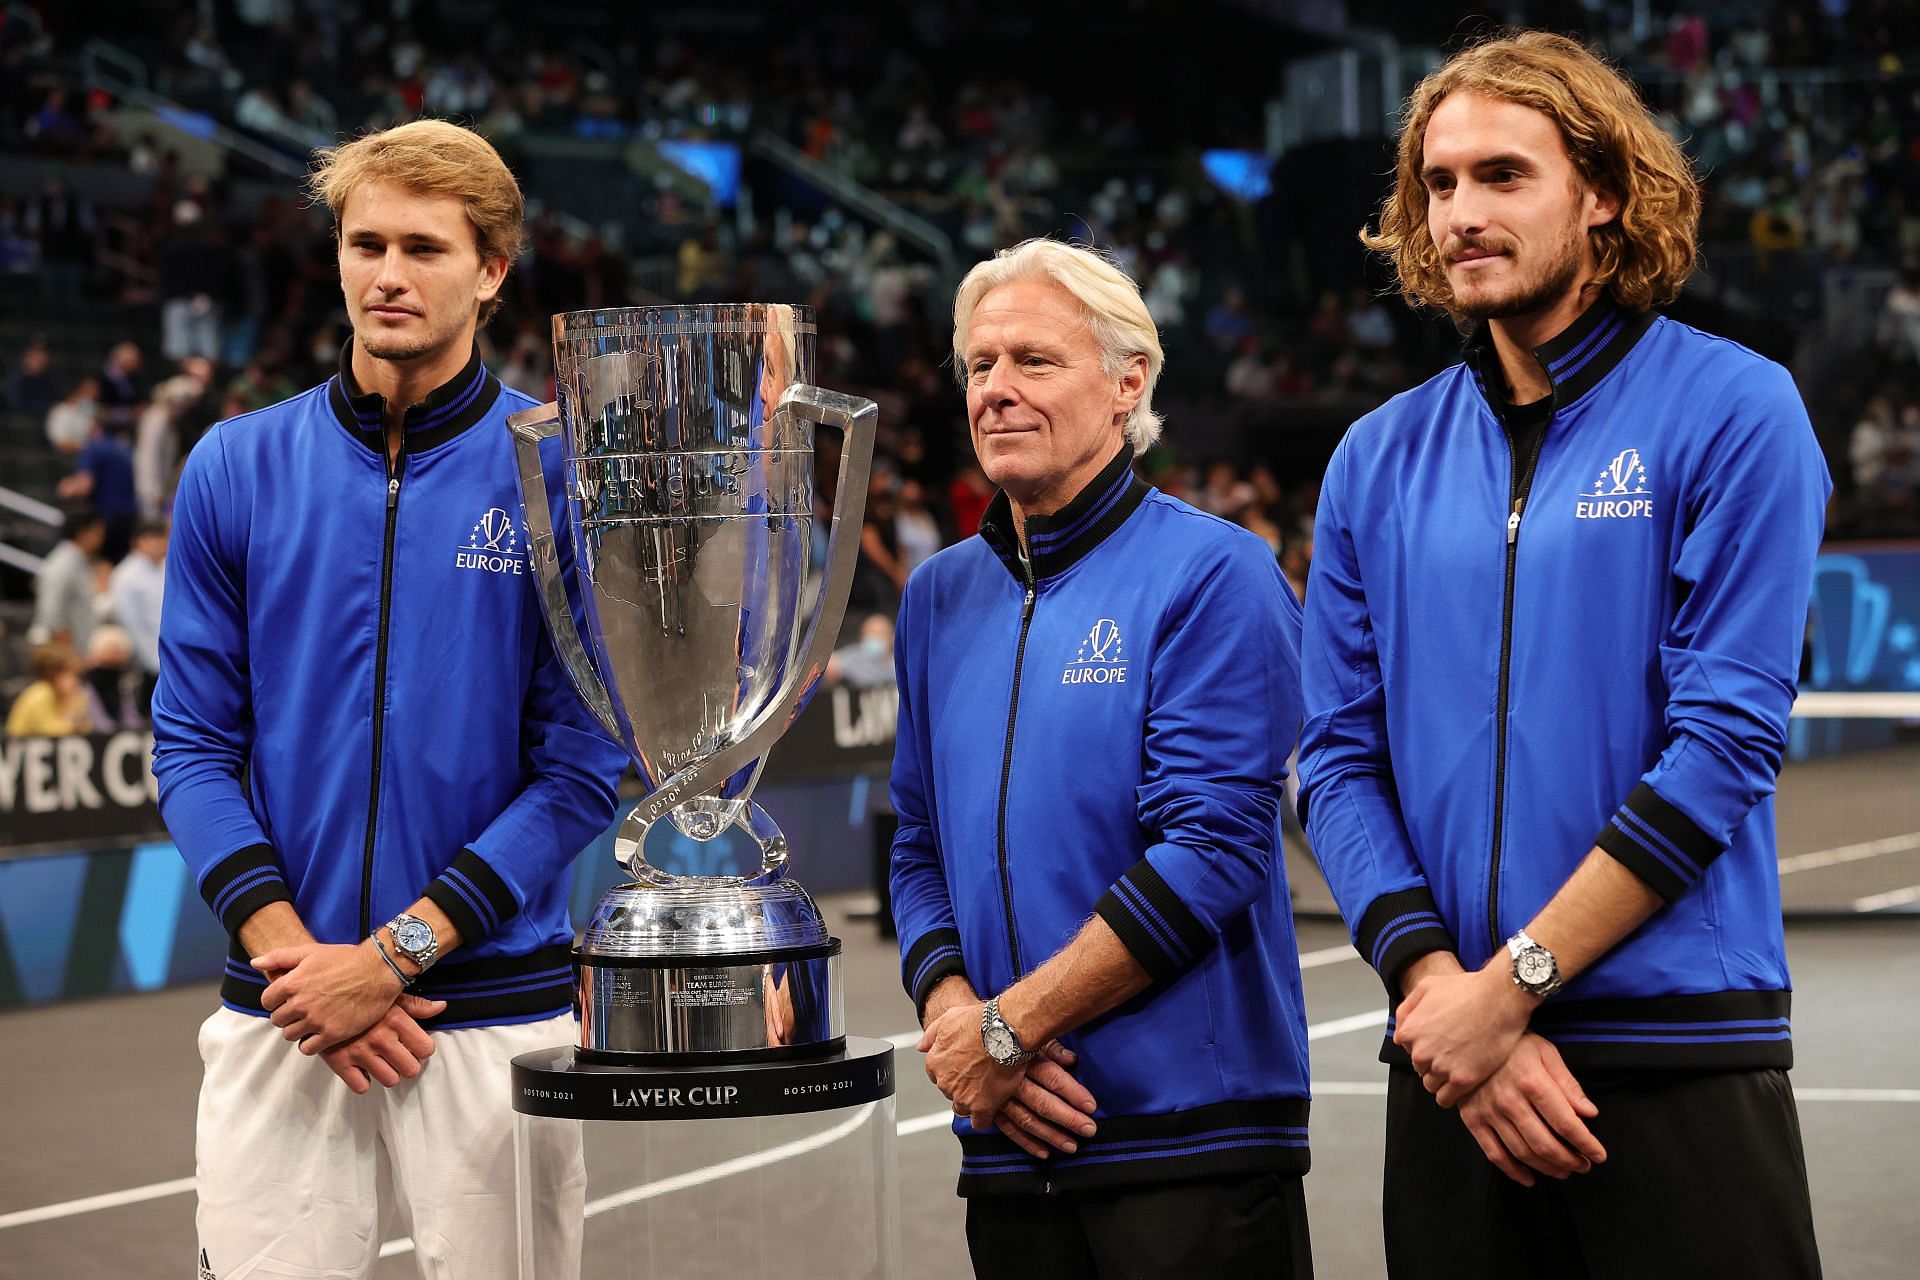 Both Alexander Zverev (L) &amp; Stefanos Tsitsipas (R) were a part of the victorious Team Europe at the Laver Cup 2021